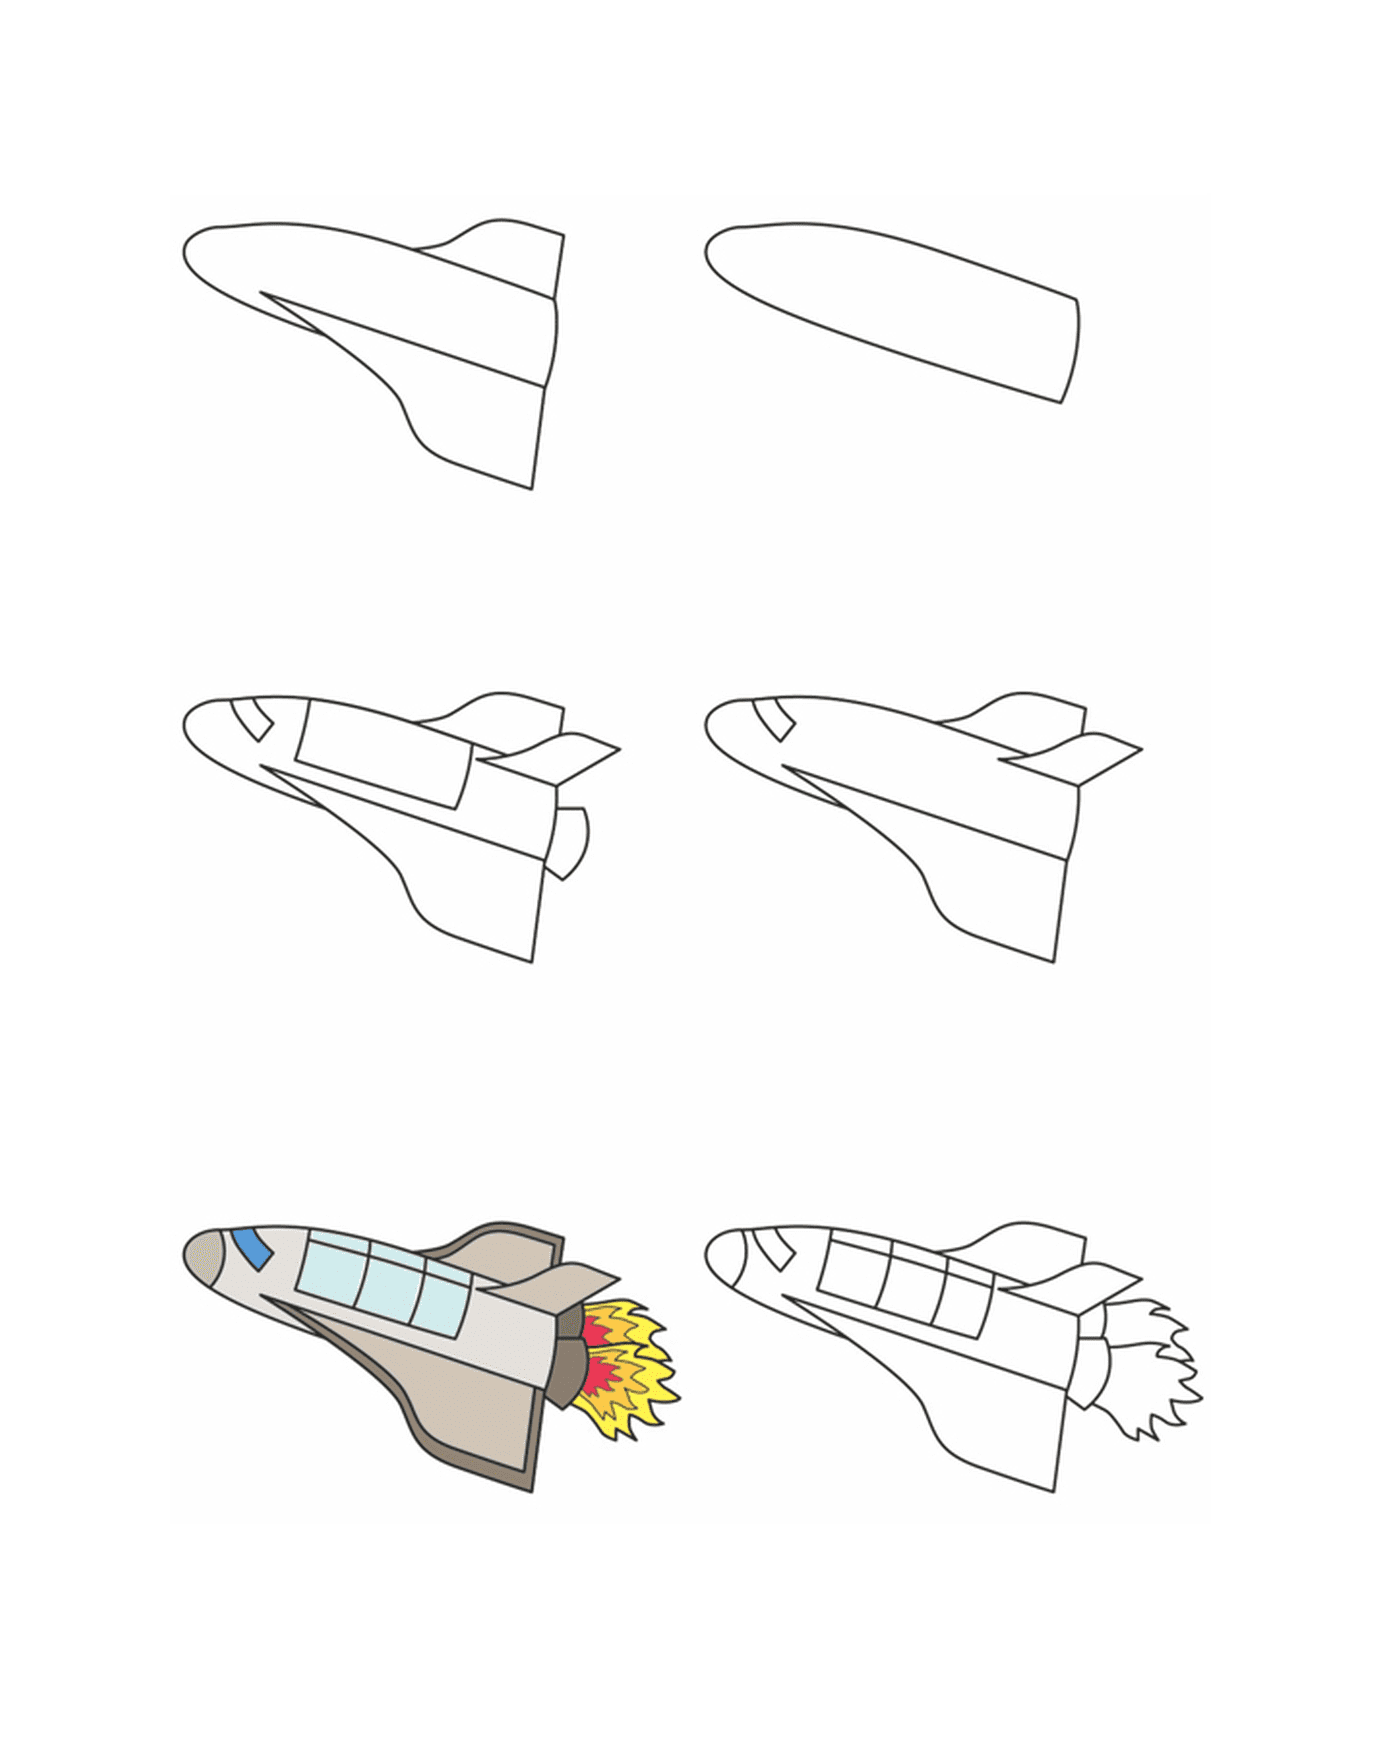  How to draw a space shuttle 